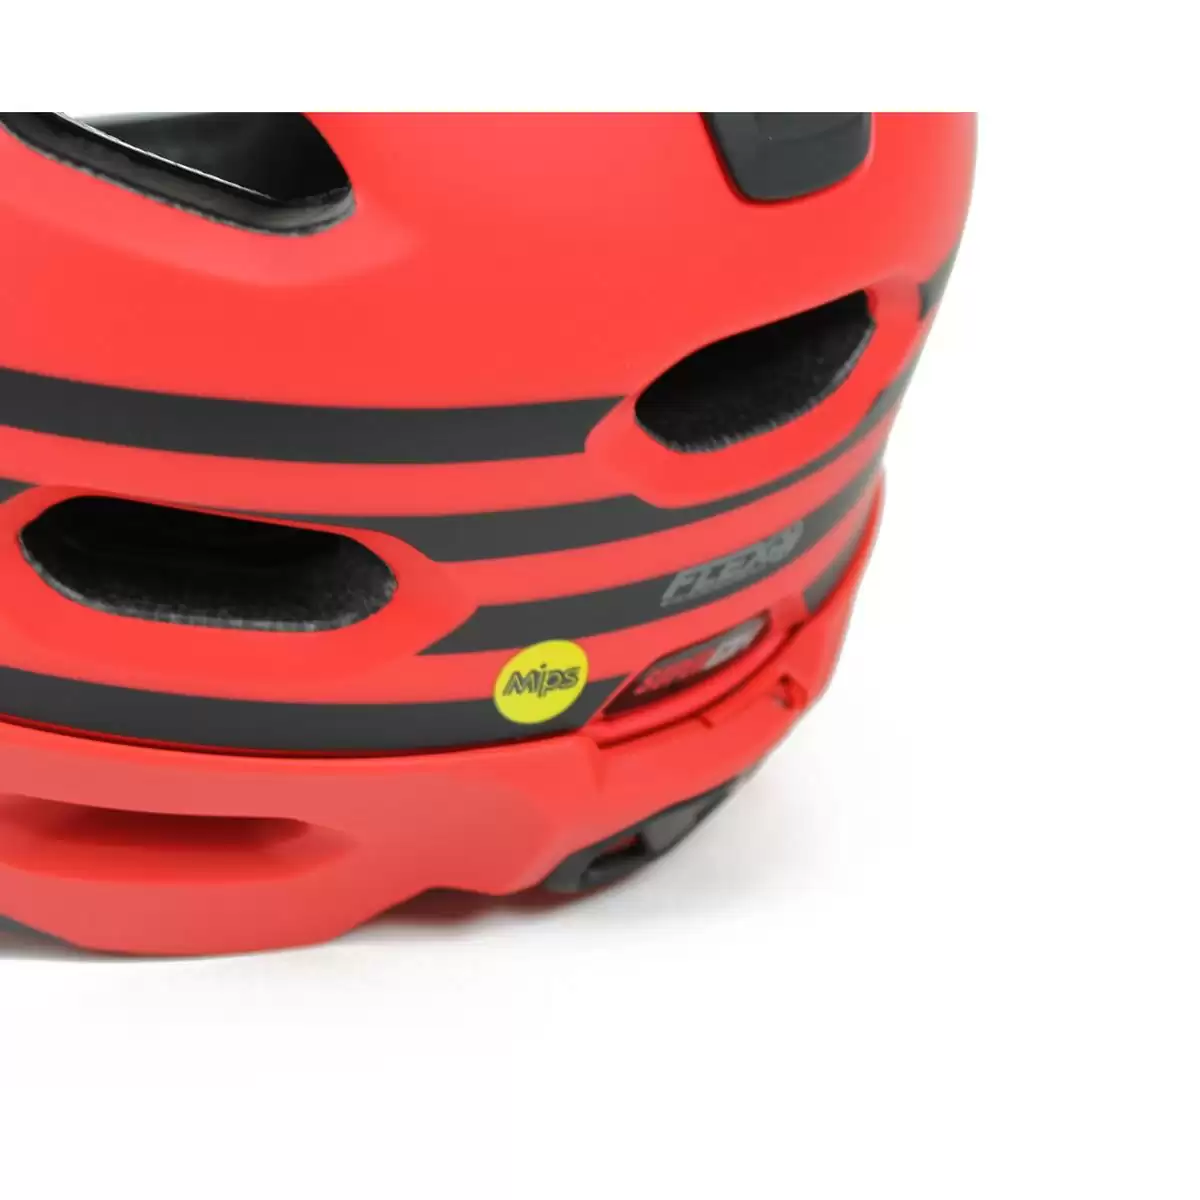 Helm Super DH MIPS Fasthouse Rot Größe S (52-56cm) #8